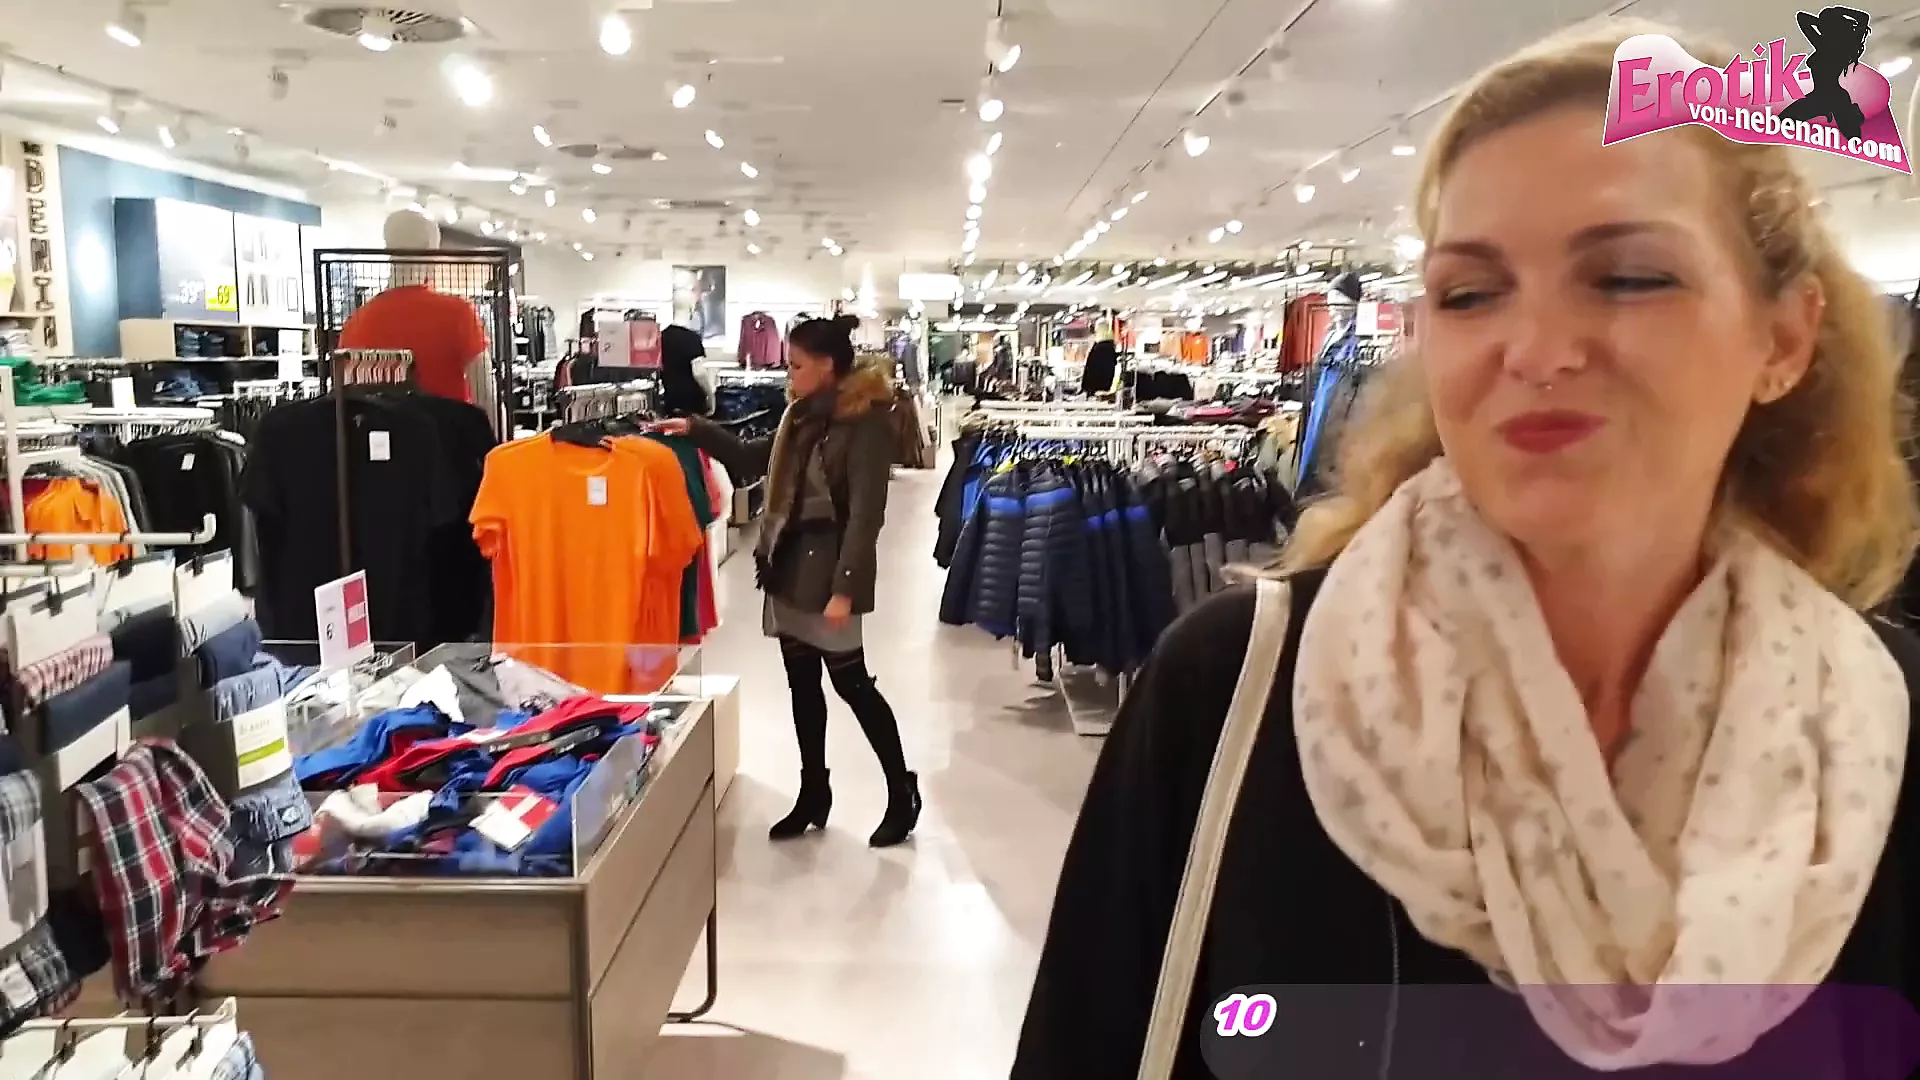 THREESOME CUM WALK IN SHOPPING CENTER AFTER Changing room picture